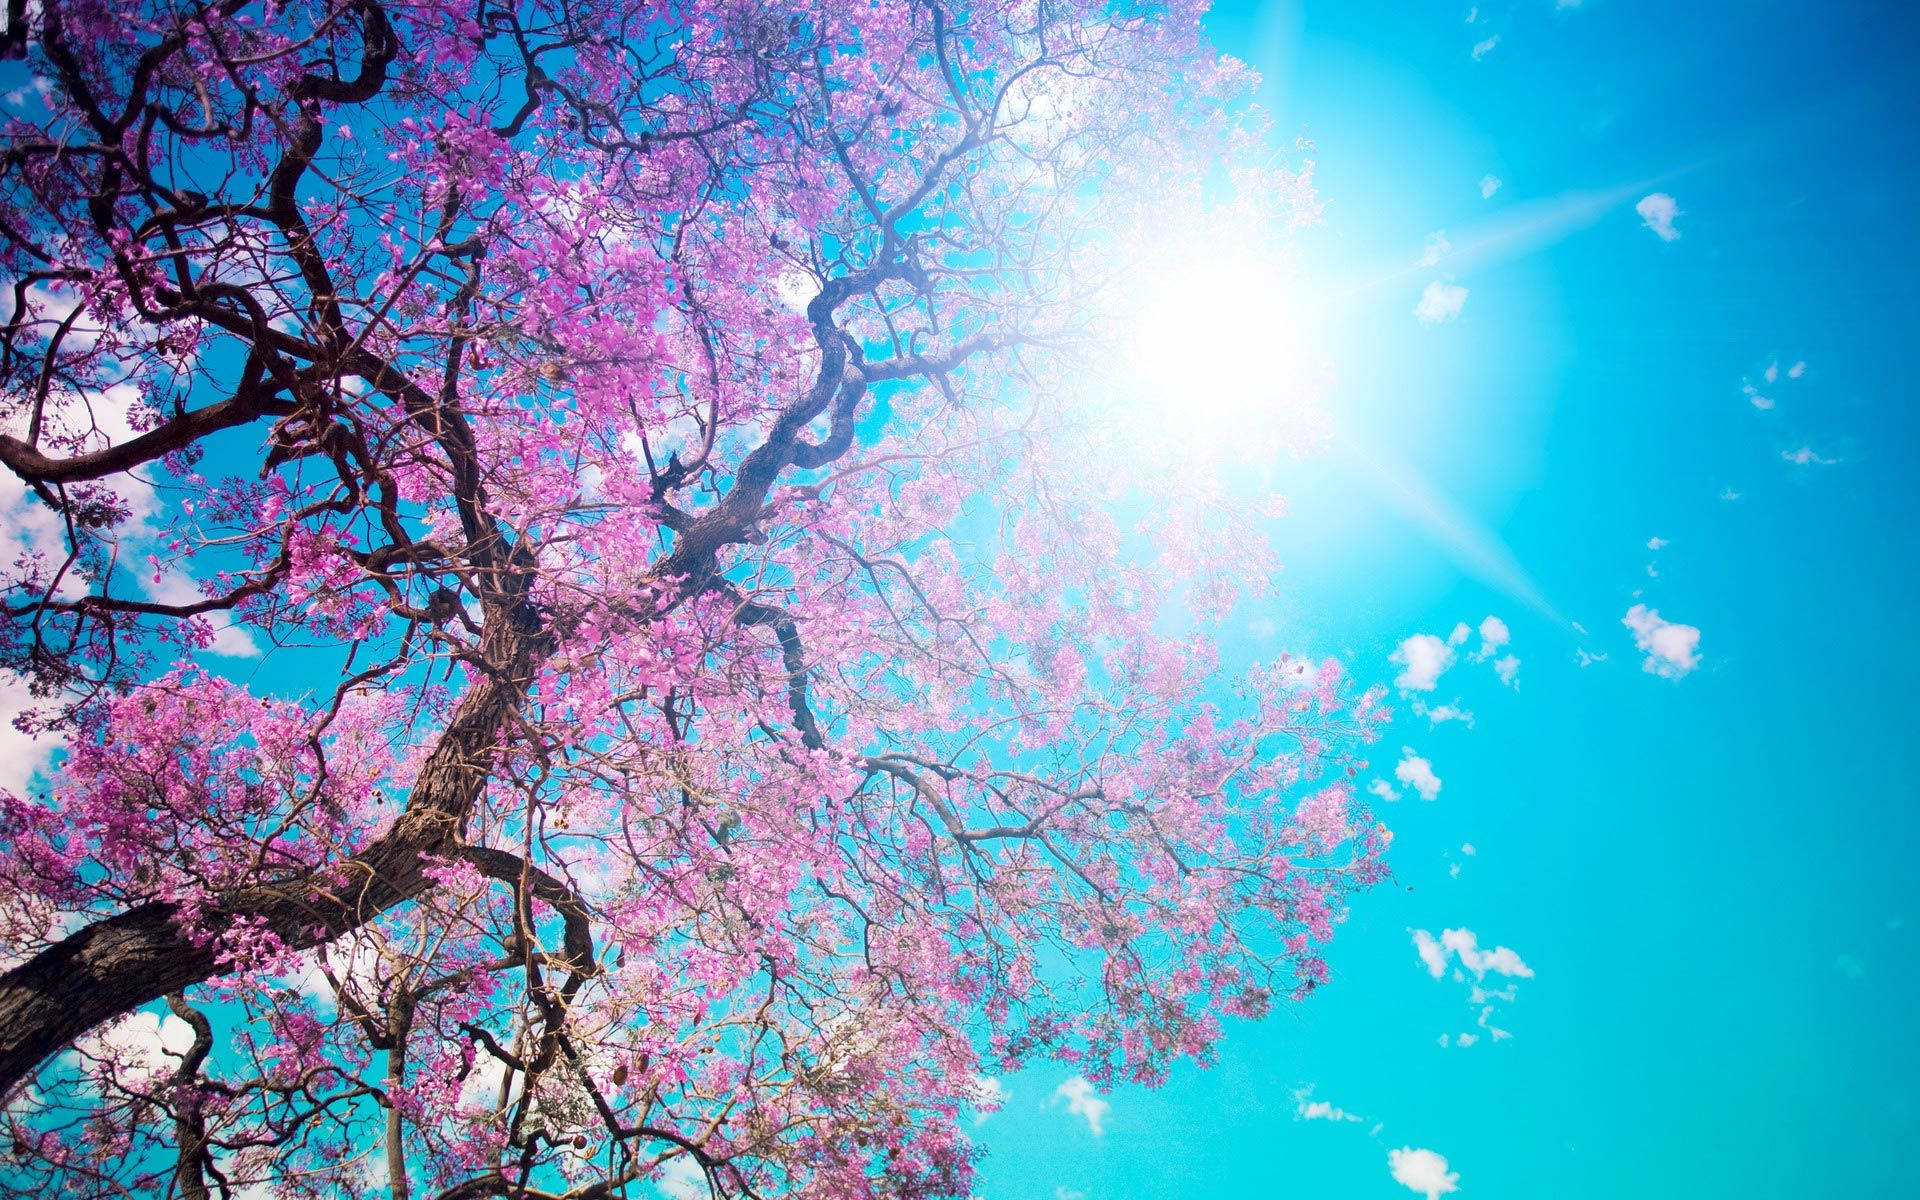 Cherry Blossom Wallpaper Photos Download The BEST Free Cherry Blossom  Wallpaper Stock Photos  HD Images